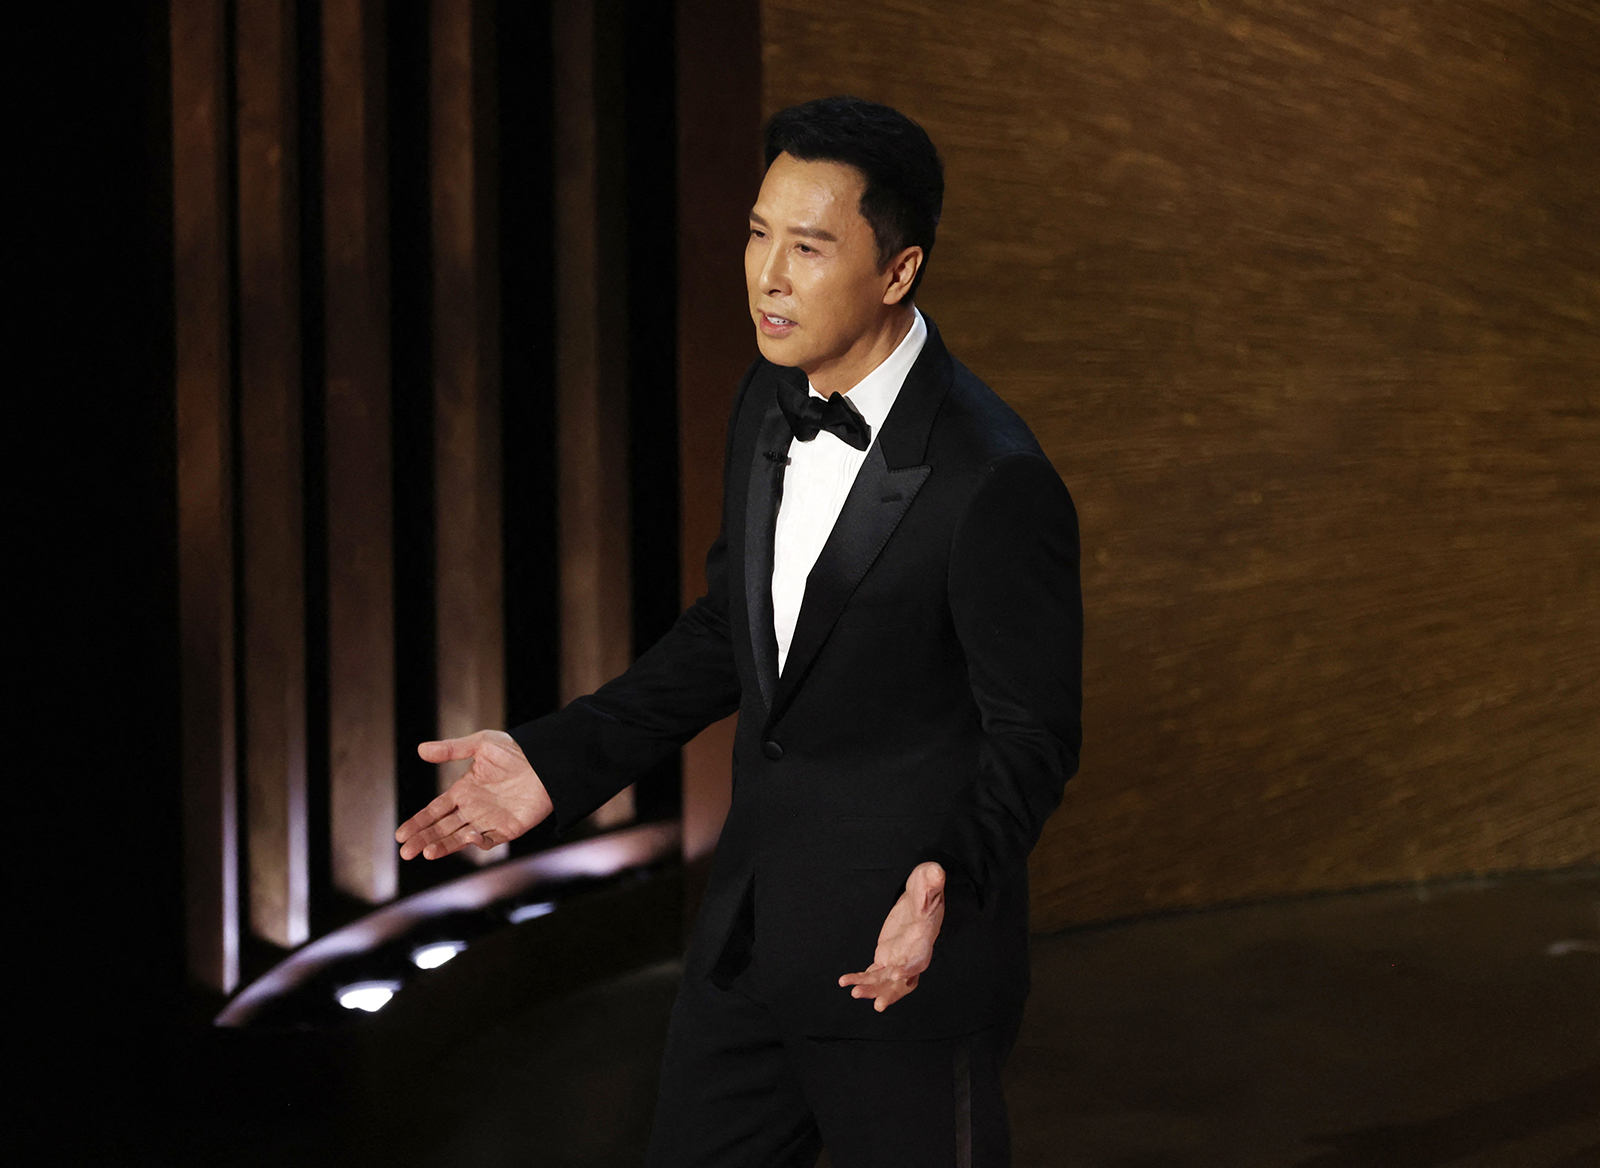 Donnie Yen introduces the performance for "This Is A Life.”